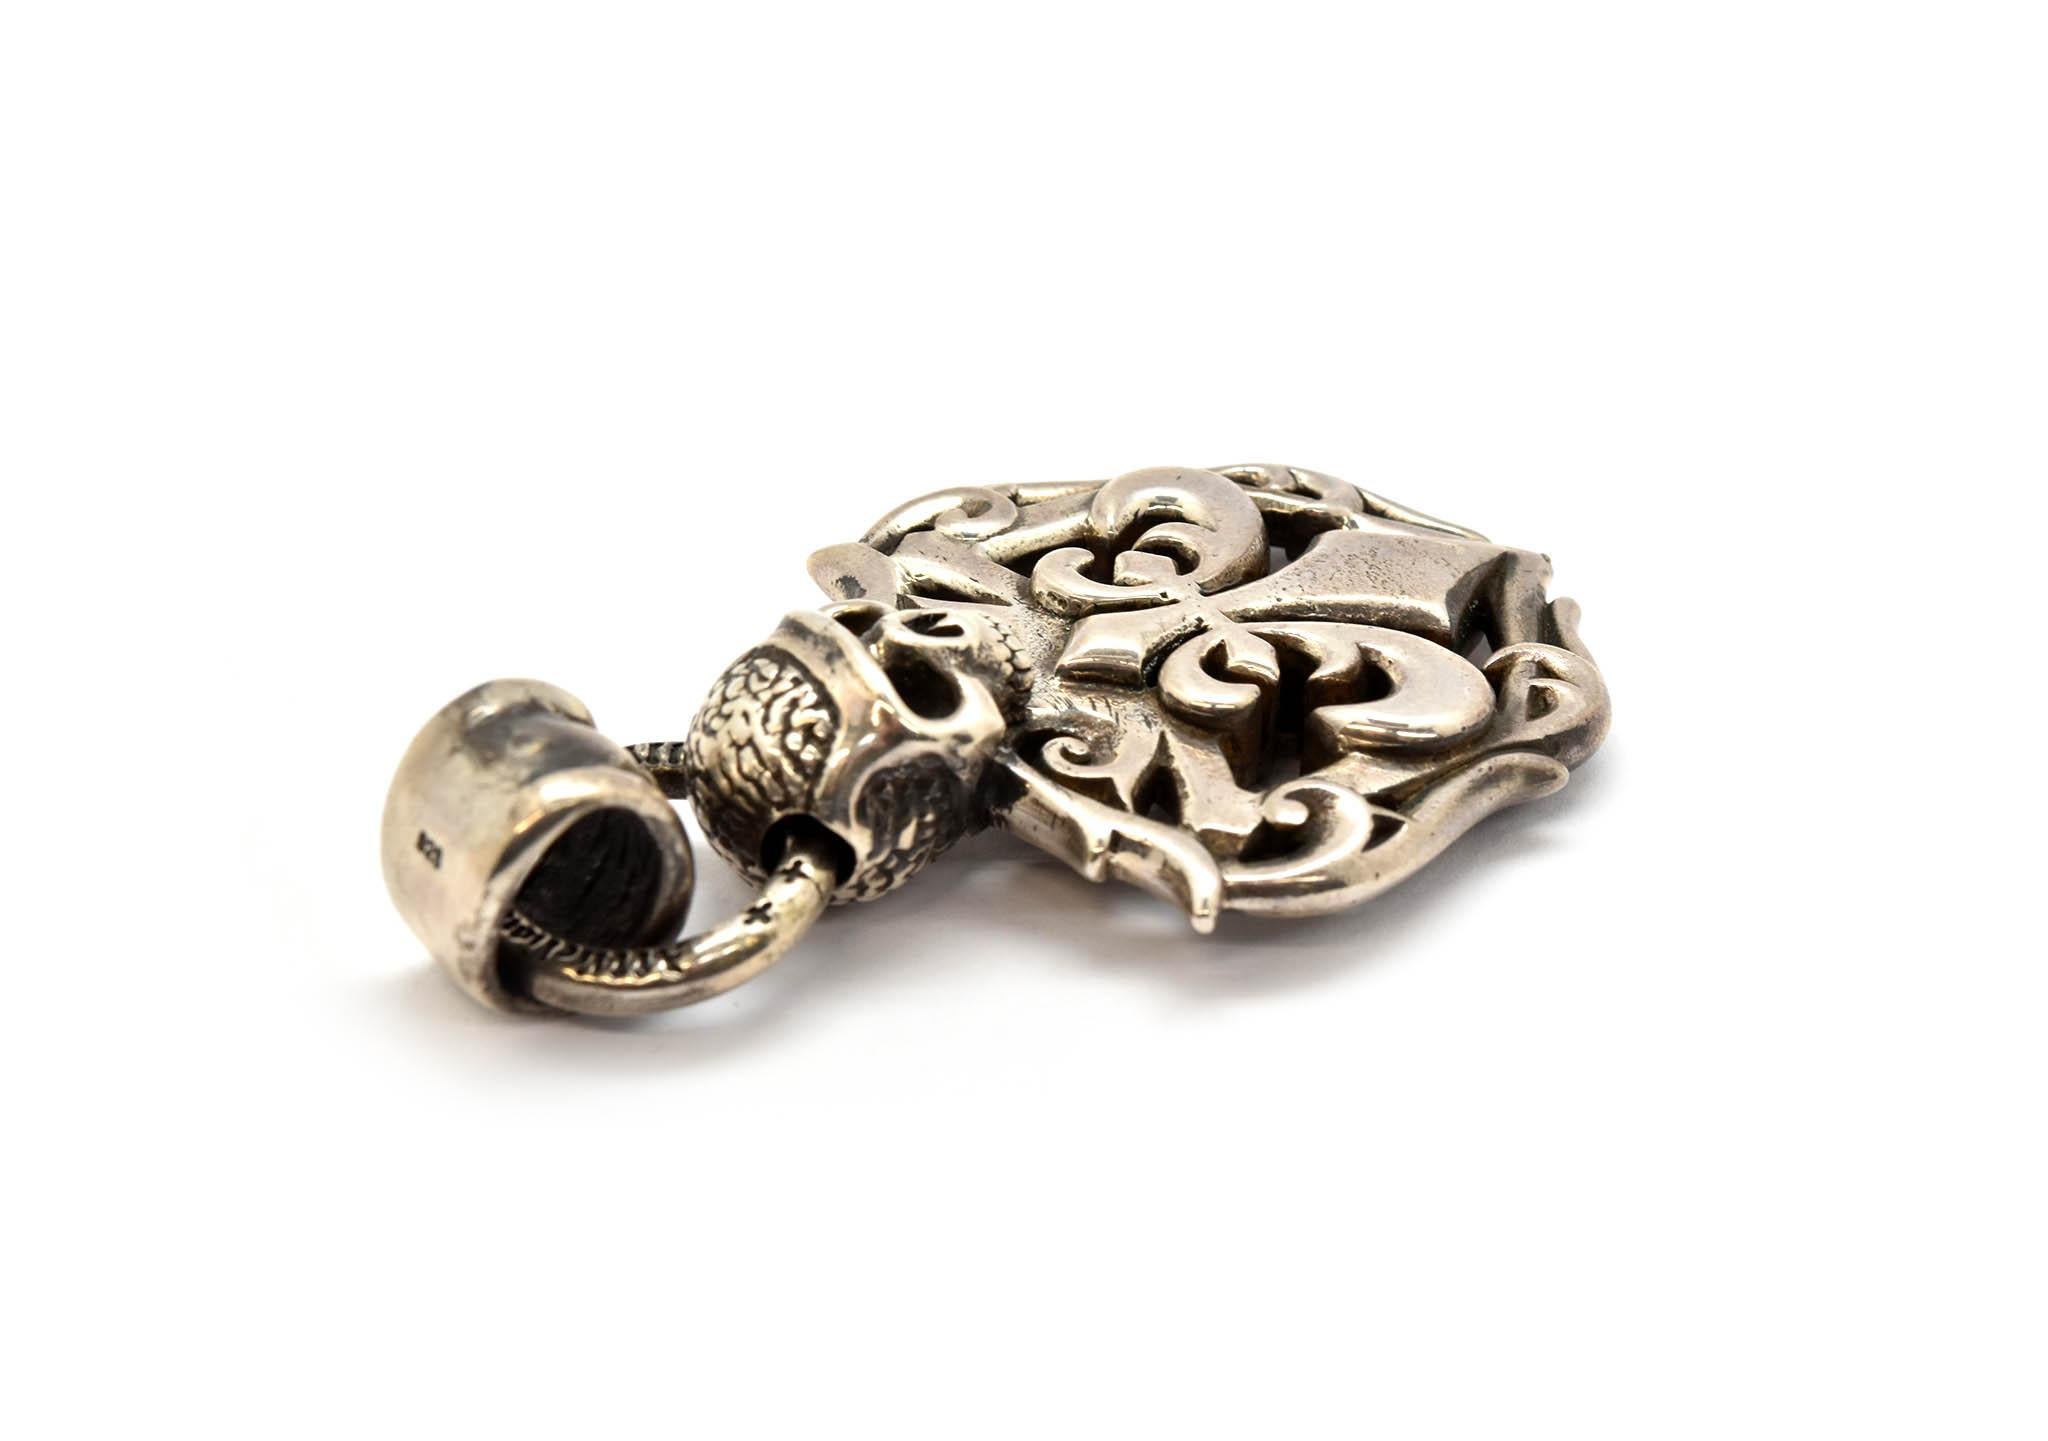 This pendant is made in sterling silver by Affliction. The pendant features a fleur de lis with a skull on top. The pendant measures 73x40mm, and it weighs 72.5 grams. The pendant is signed 